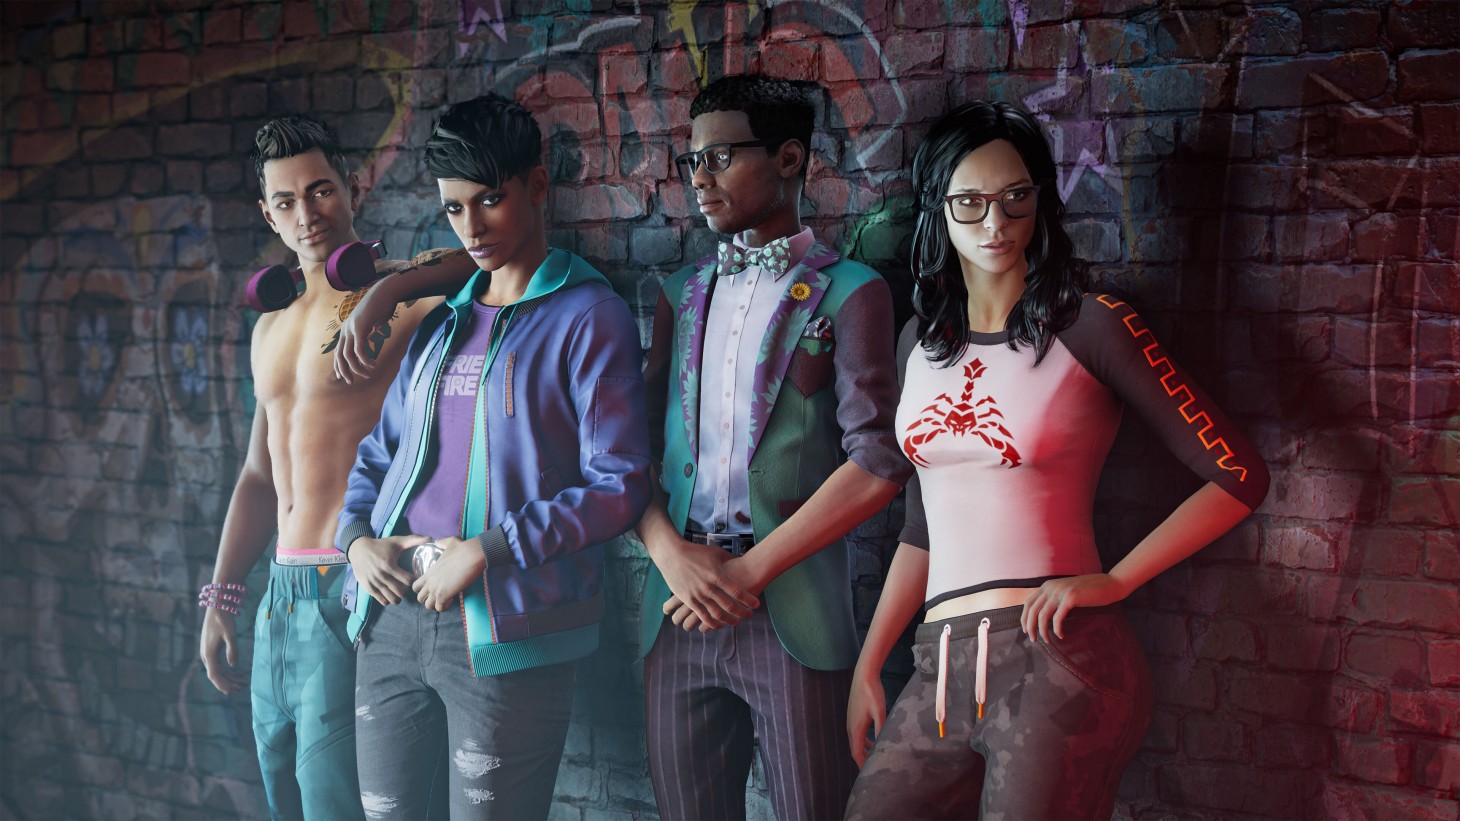 Saints Row story mission gameplay revealed